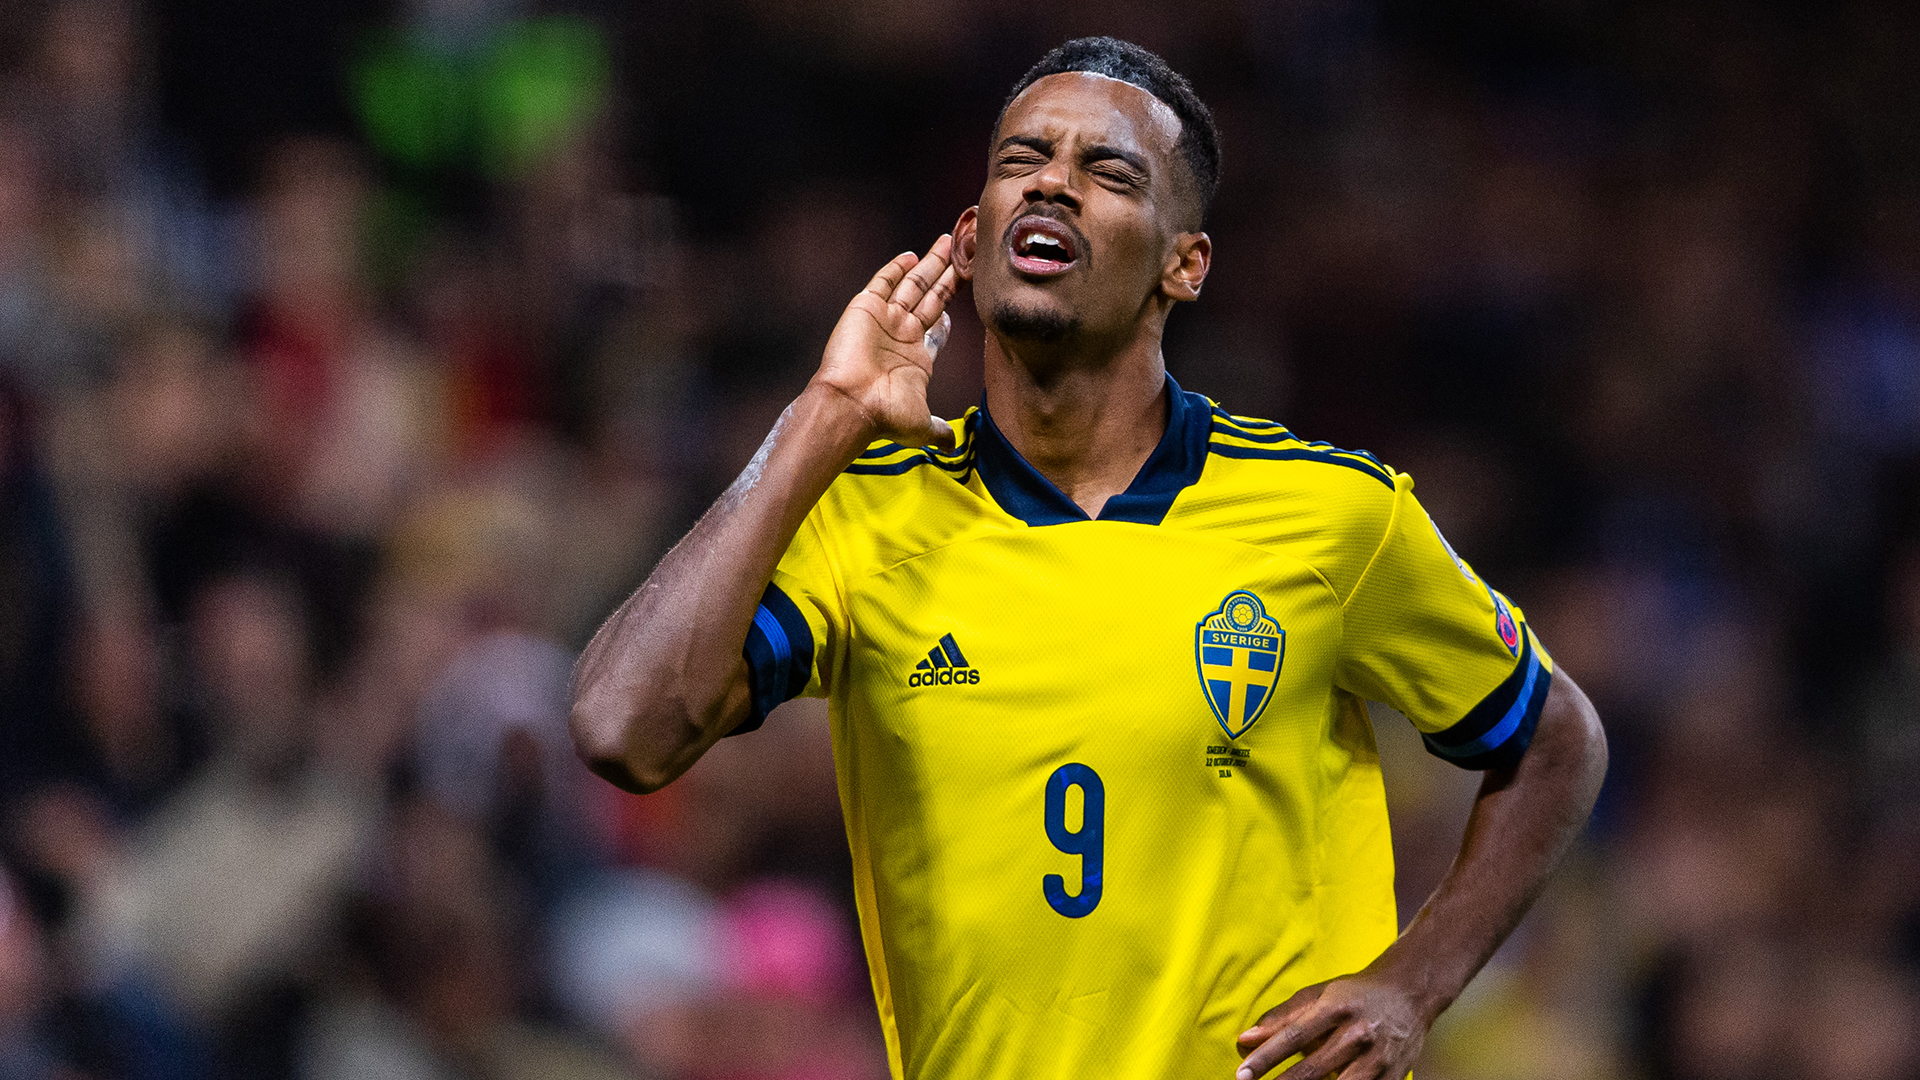 Sweden beat Greece 2-0 to pile pressure on La Roja in World Cup qualifying campaign